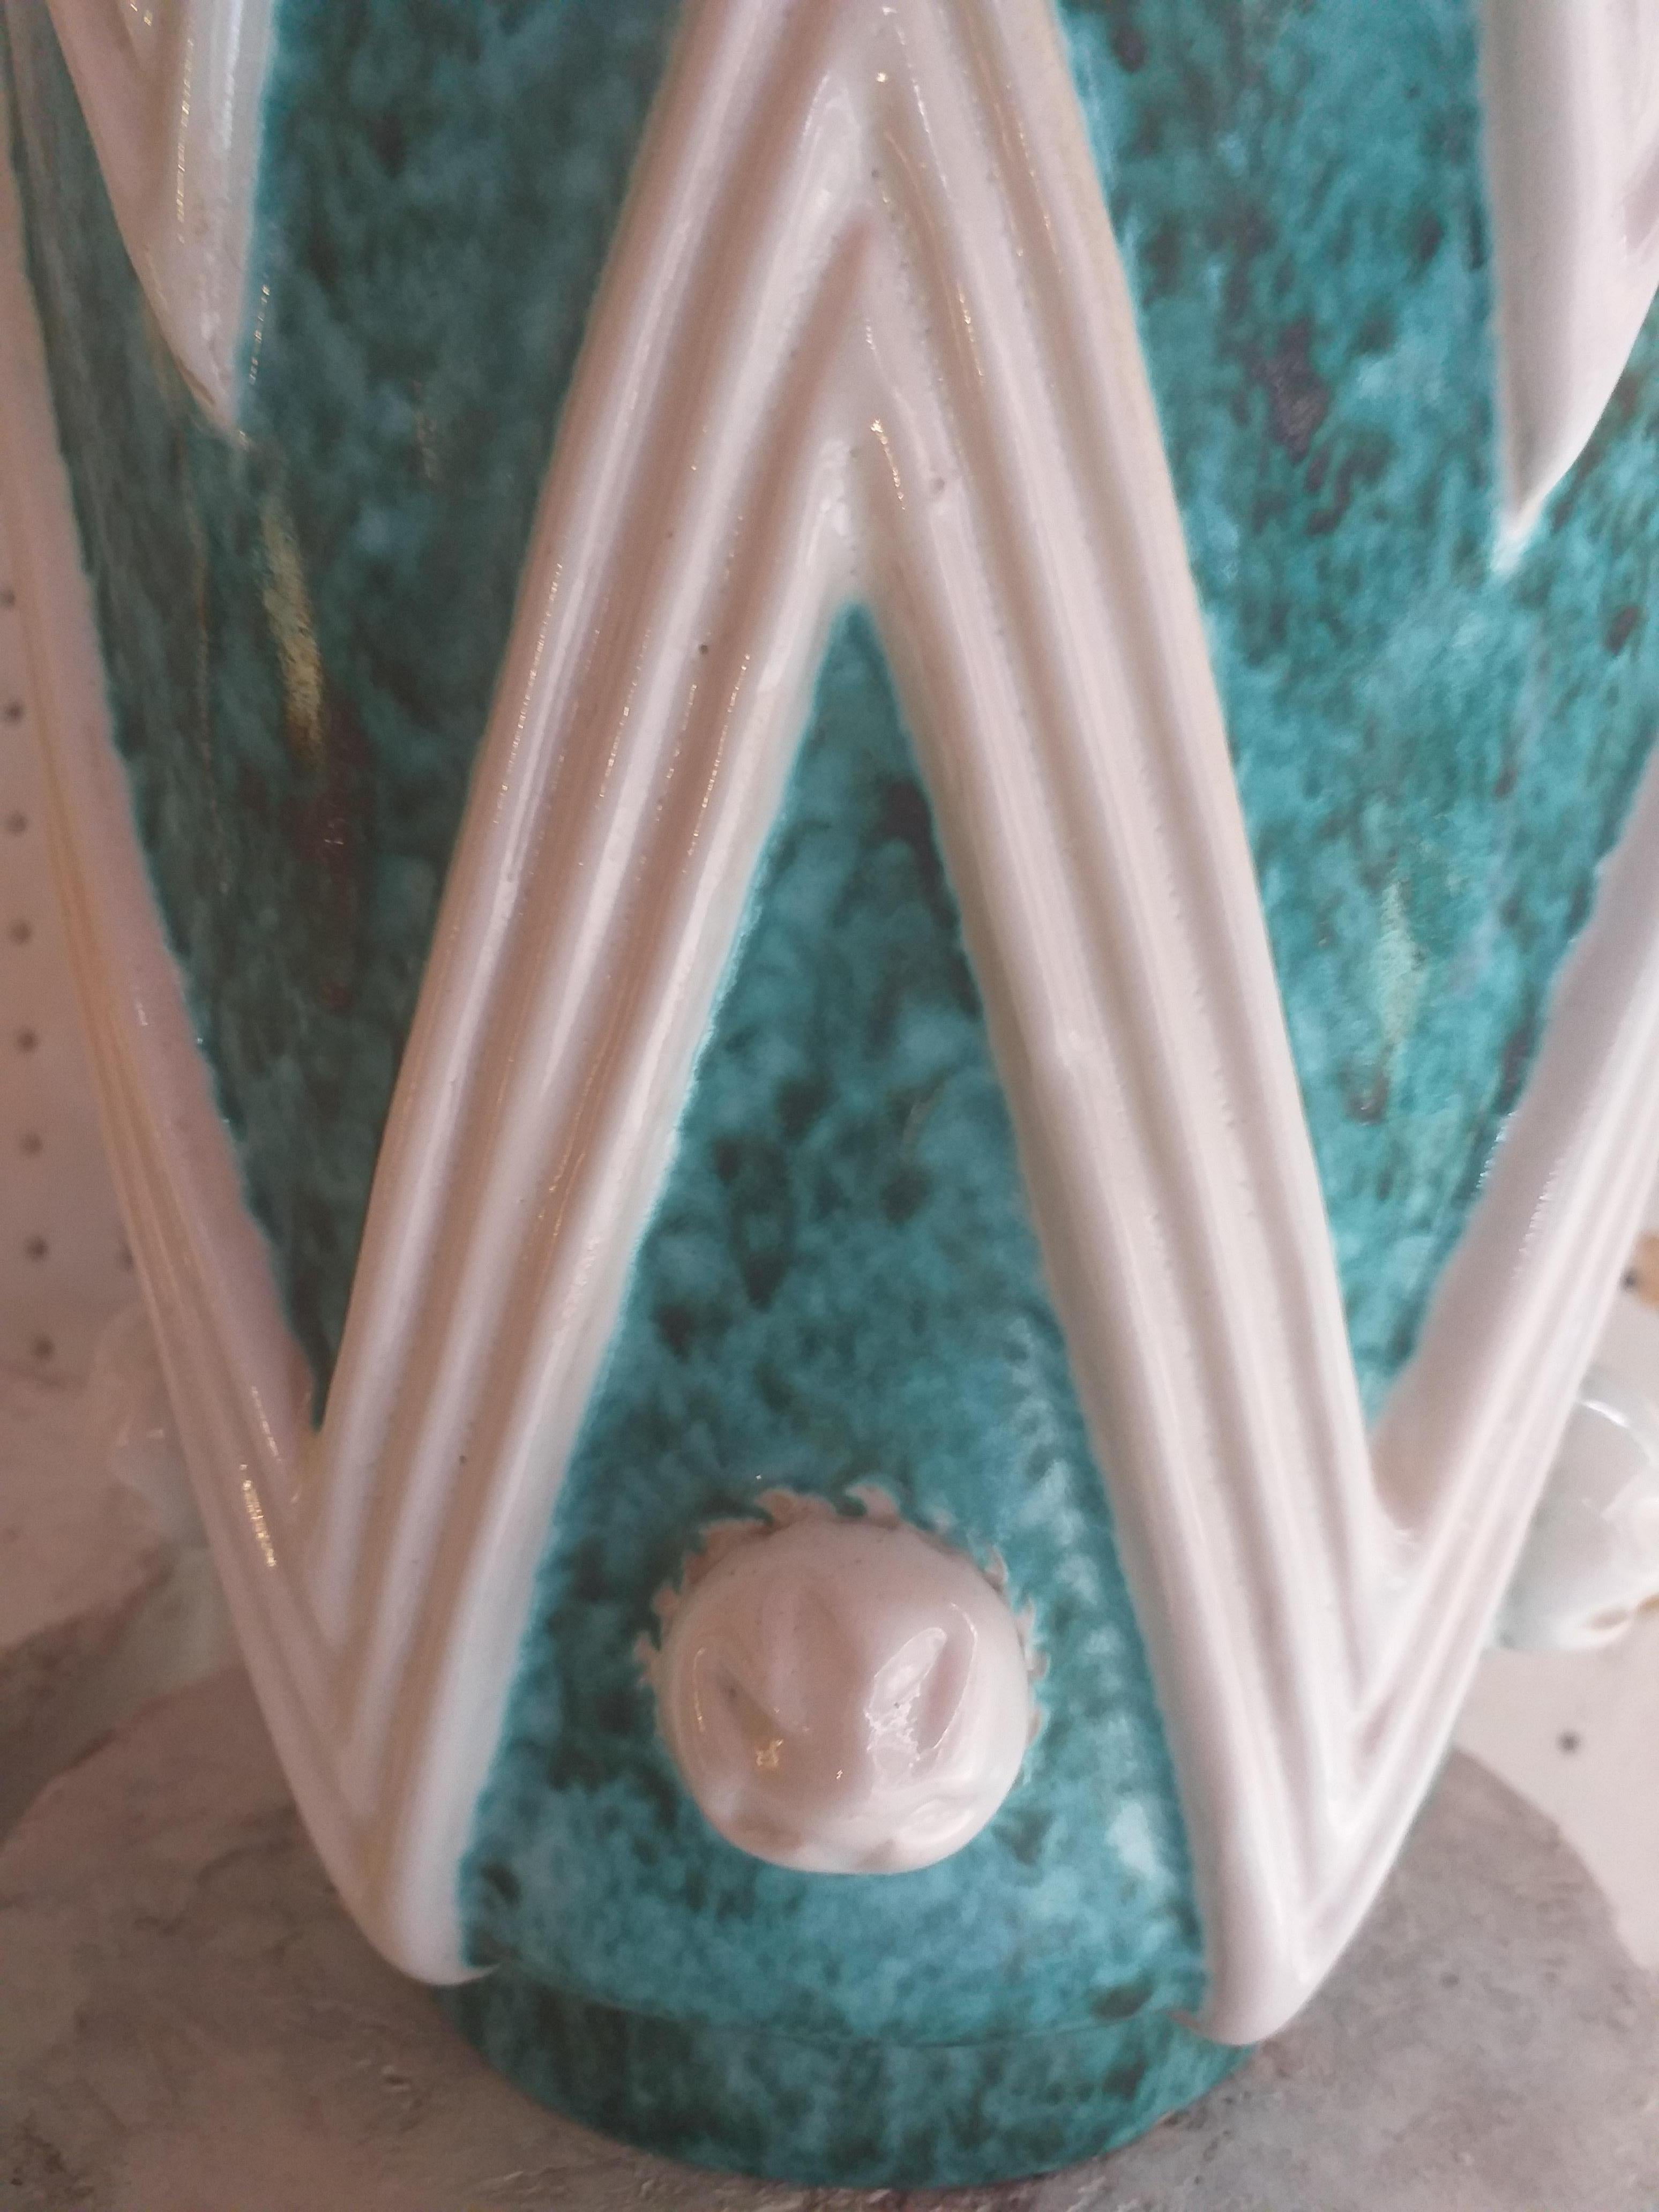 A turquoise glazed ceramic vase with white ornamental motifs made by the Sainte-Radegonde workshop and the Ateliers Primavera.